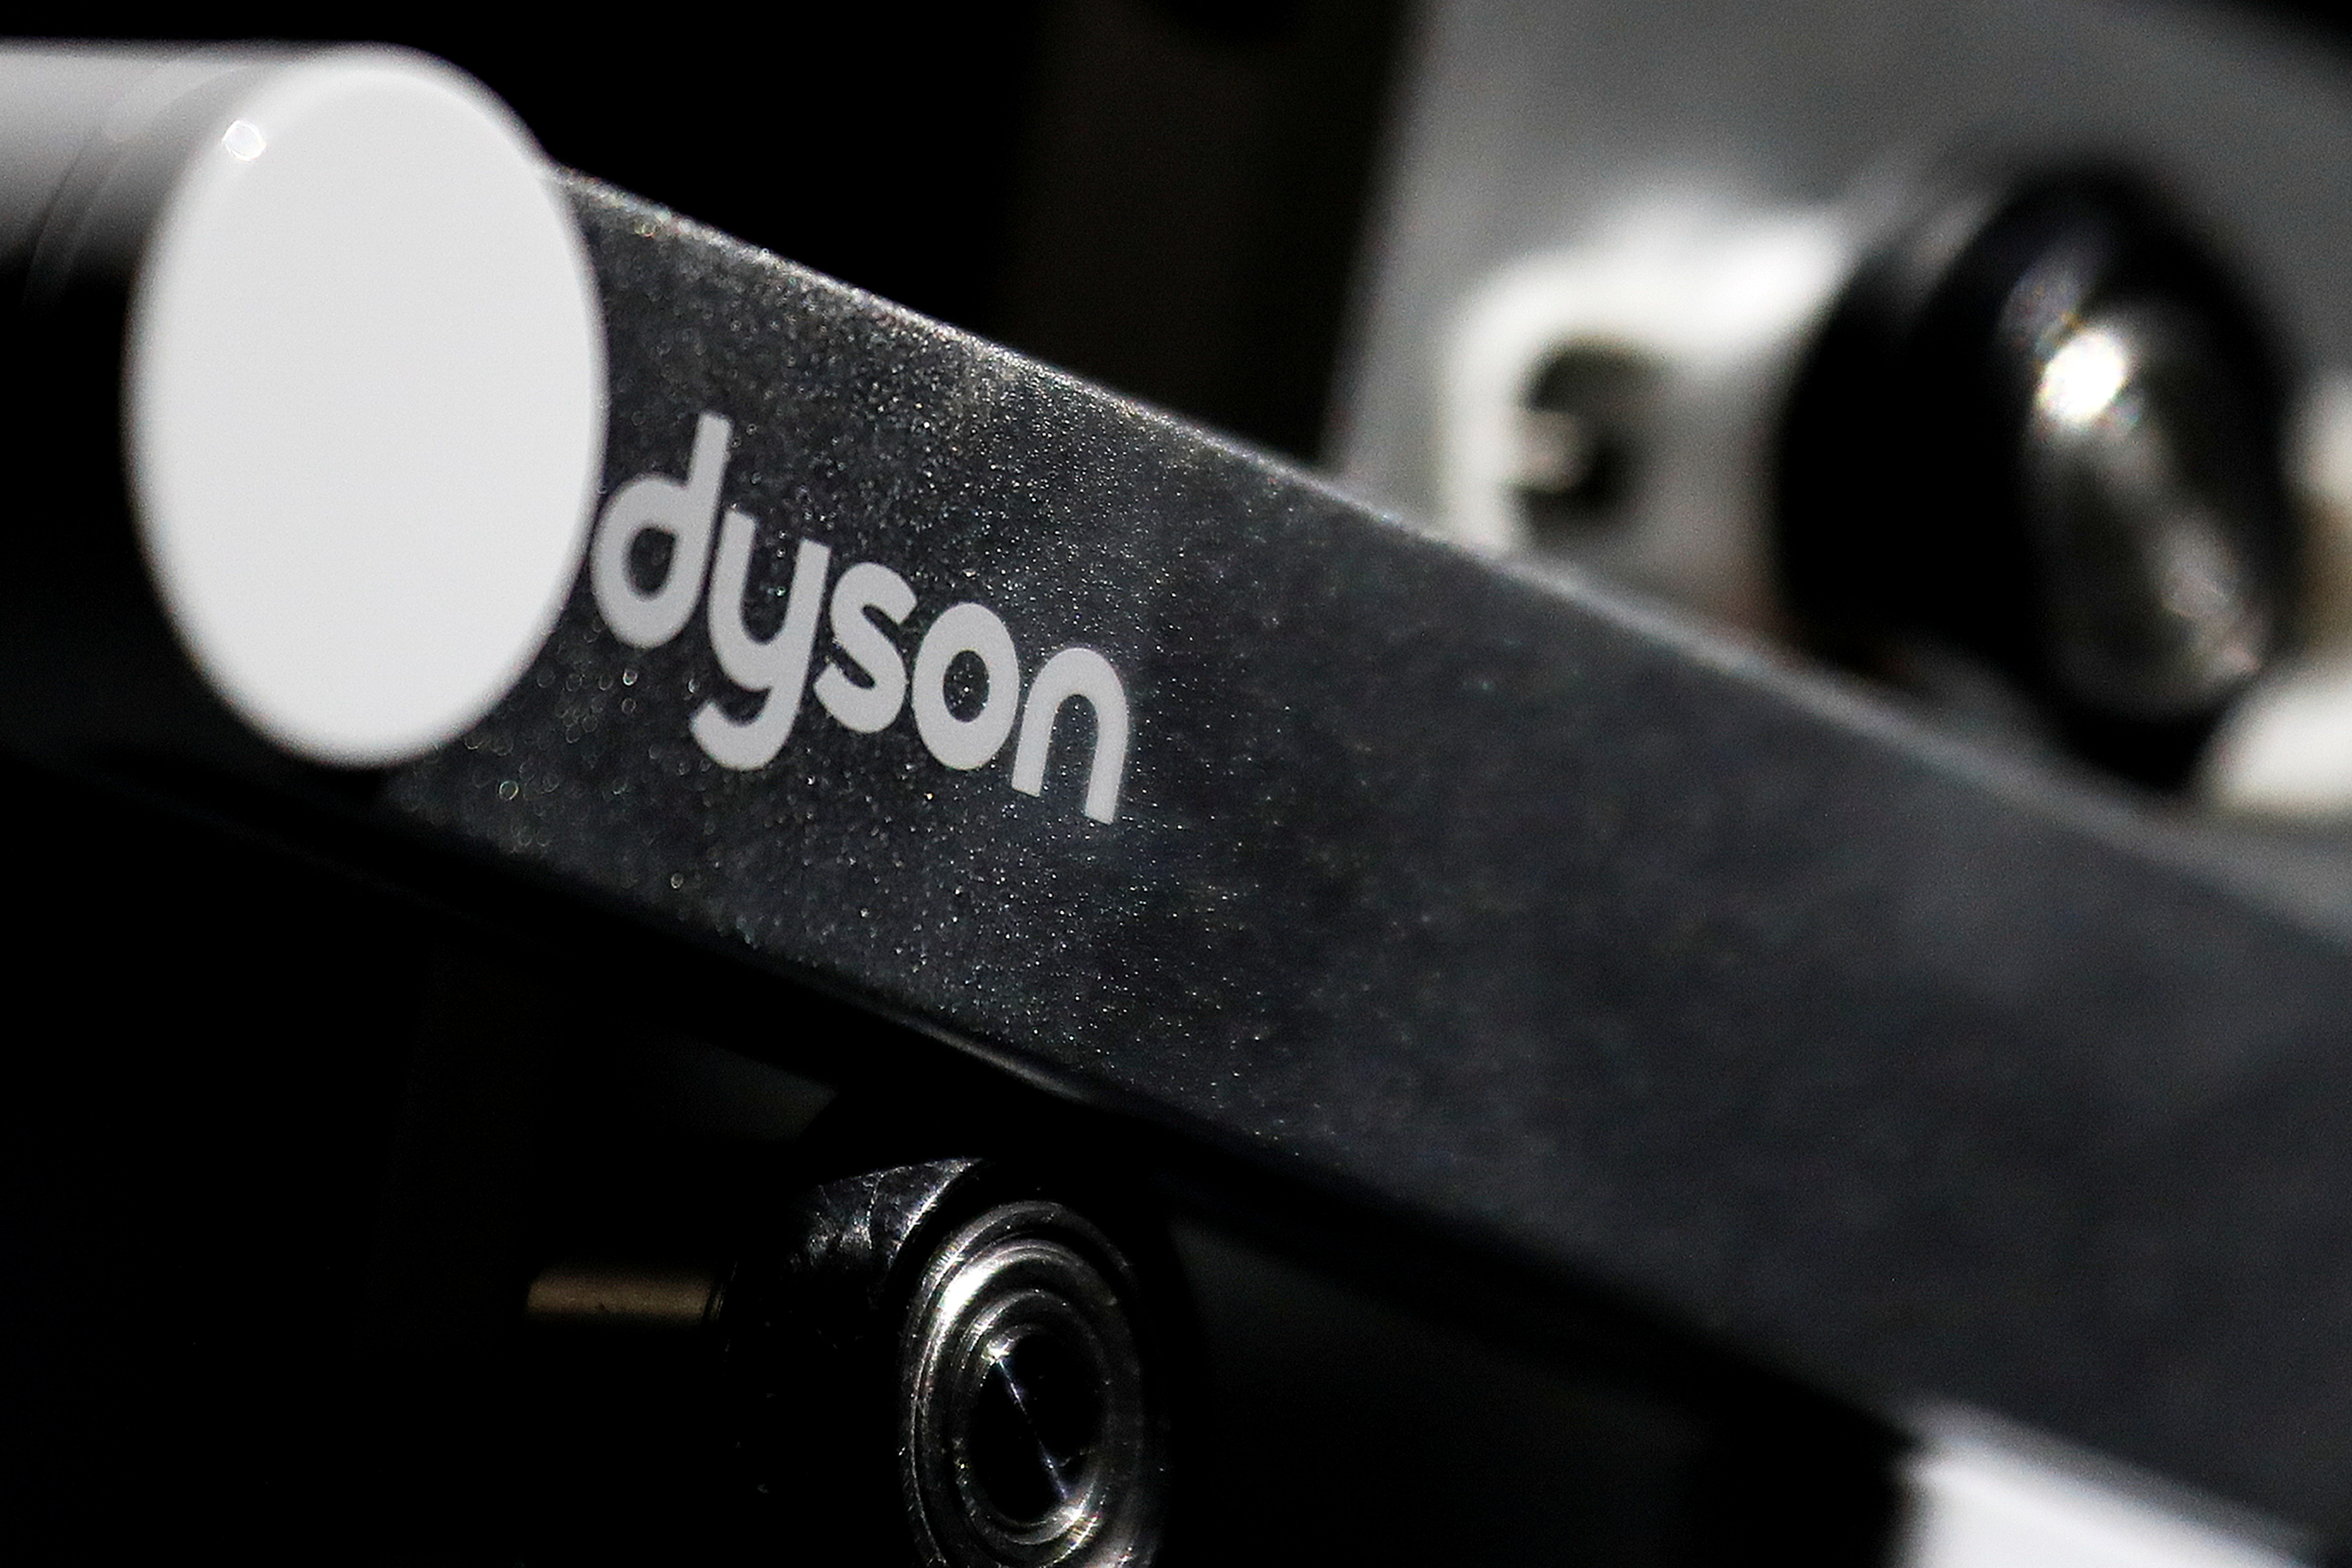 Dyson logo is seen on one of company's products presented during an event in Beijing